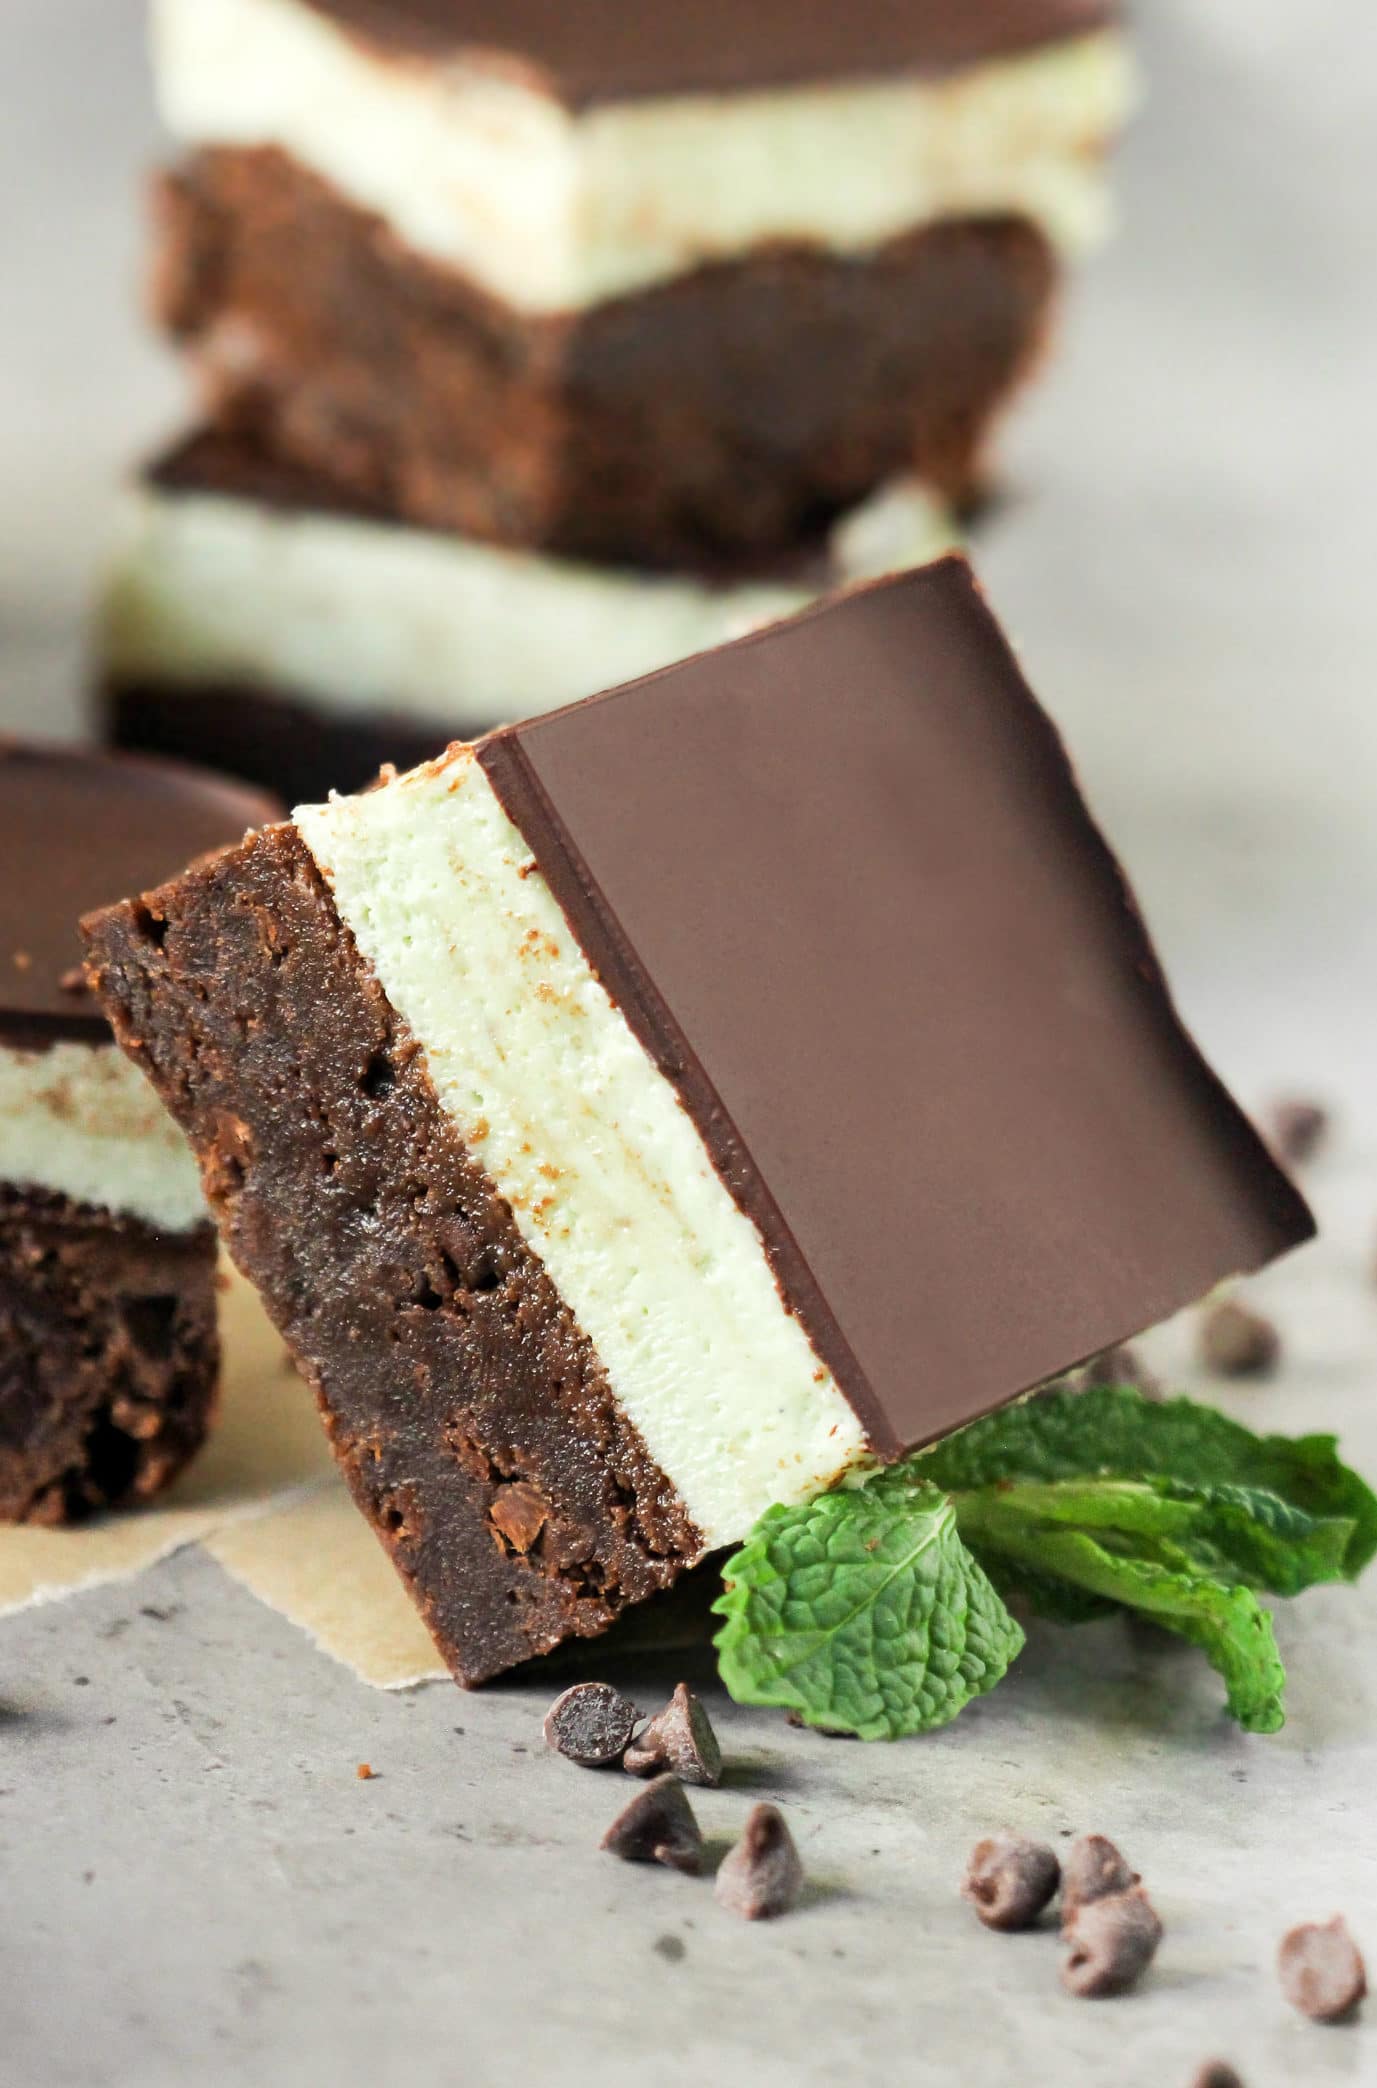 These Grasshopper Brownies are chocolatey, minty, sweet, and SUPREMELY delicious! Made with the fudgiest of the fudgy brownie base, a thick layer of mint frosting, and the perfect amount of dark chocolate to top everything off. This is one incredible, if not mind-blowing, dessert! Healthy Dessert Recipes at the Desserts With Benefits Blog (www.DessertsWithBenefits.com)